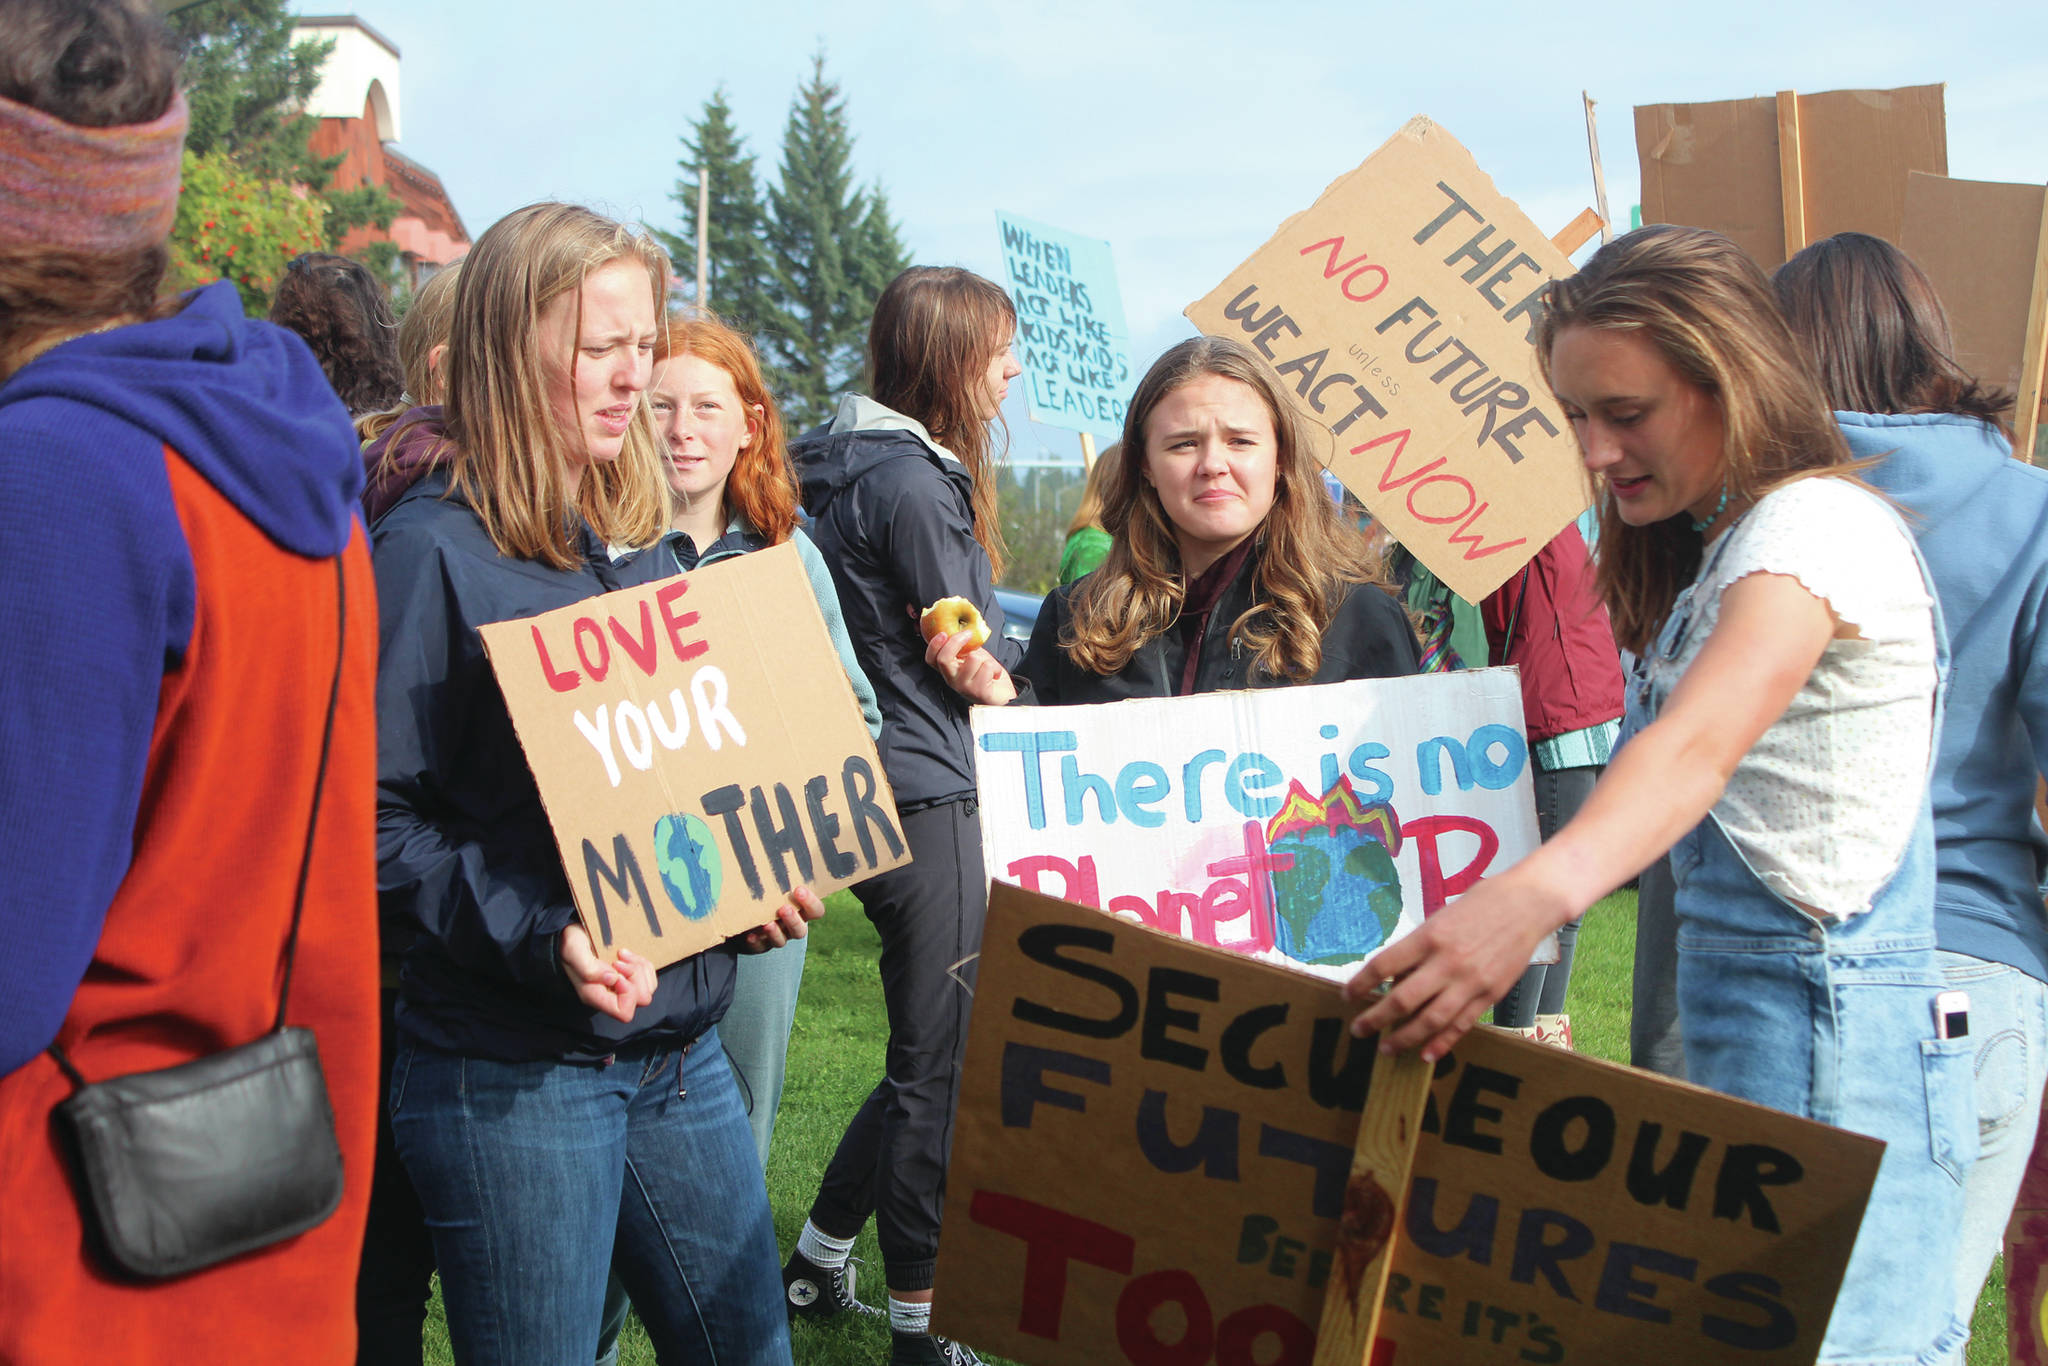 Homer High School students compare signs at the start of the Homer Youth Climate Strike on Friday, Sept. 20, 2019 at Wisdom, Knowledge, Faith and Love Park in Homer, Alaska. Students left school before their sixth period to hold the rally in the park and were joined by community members. (Photo by Megan Pacer/Homer News)